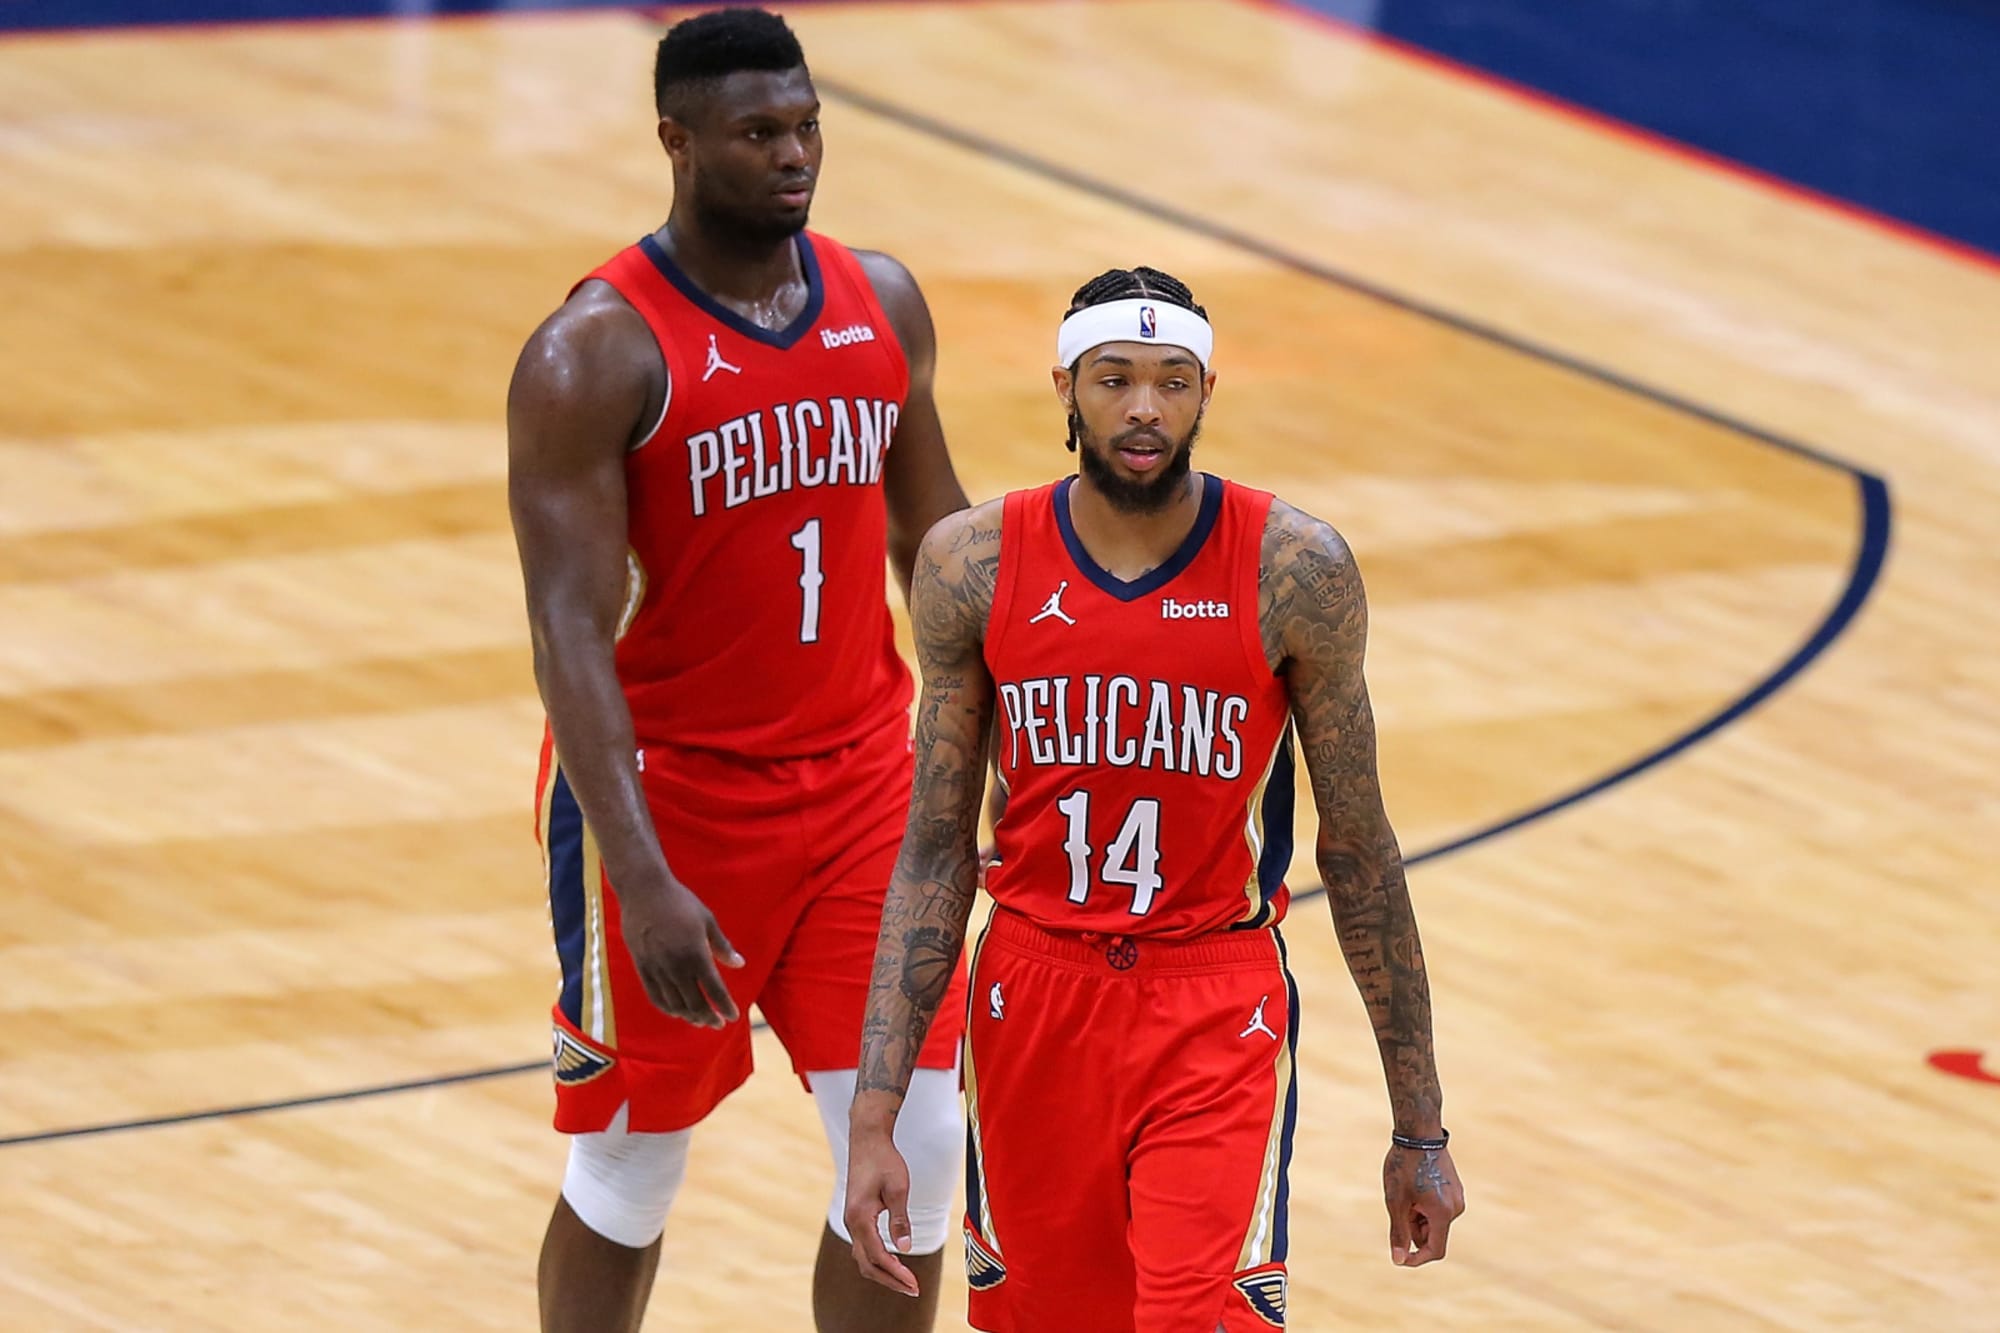 The Pelicans will either sink or swim